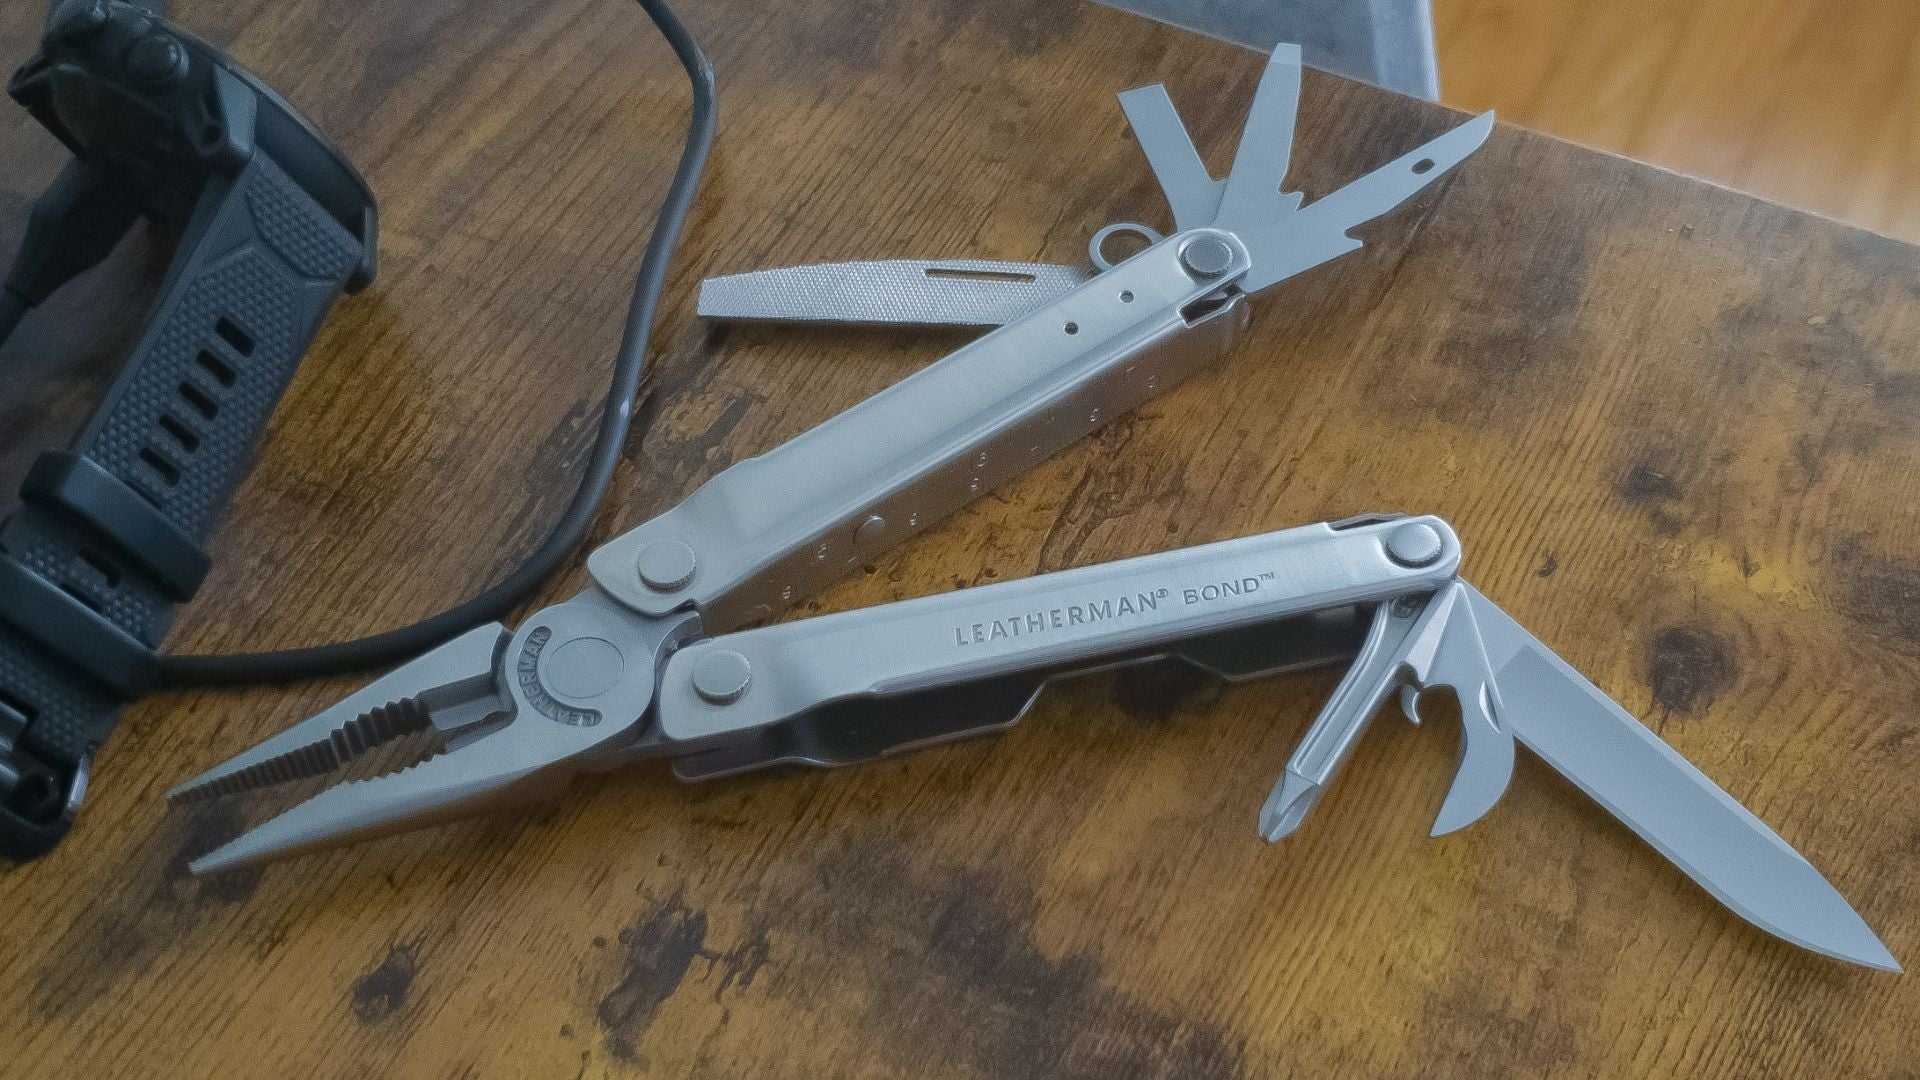 Migratie versnelling animatie Leatherman Bond review: a fittingly British multitool in all the wrong ways